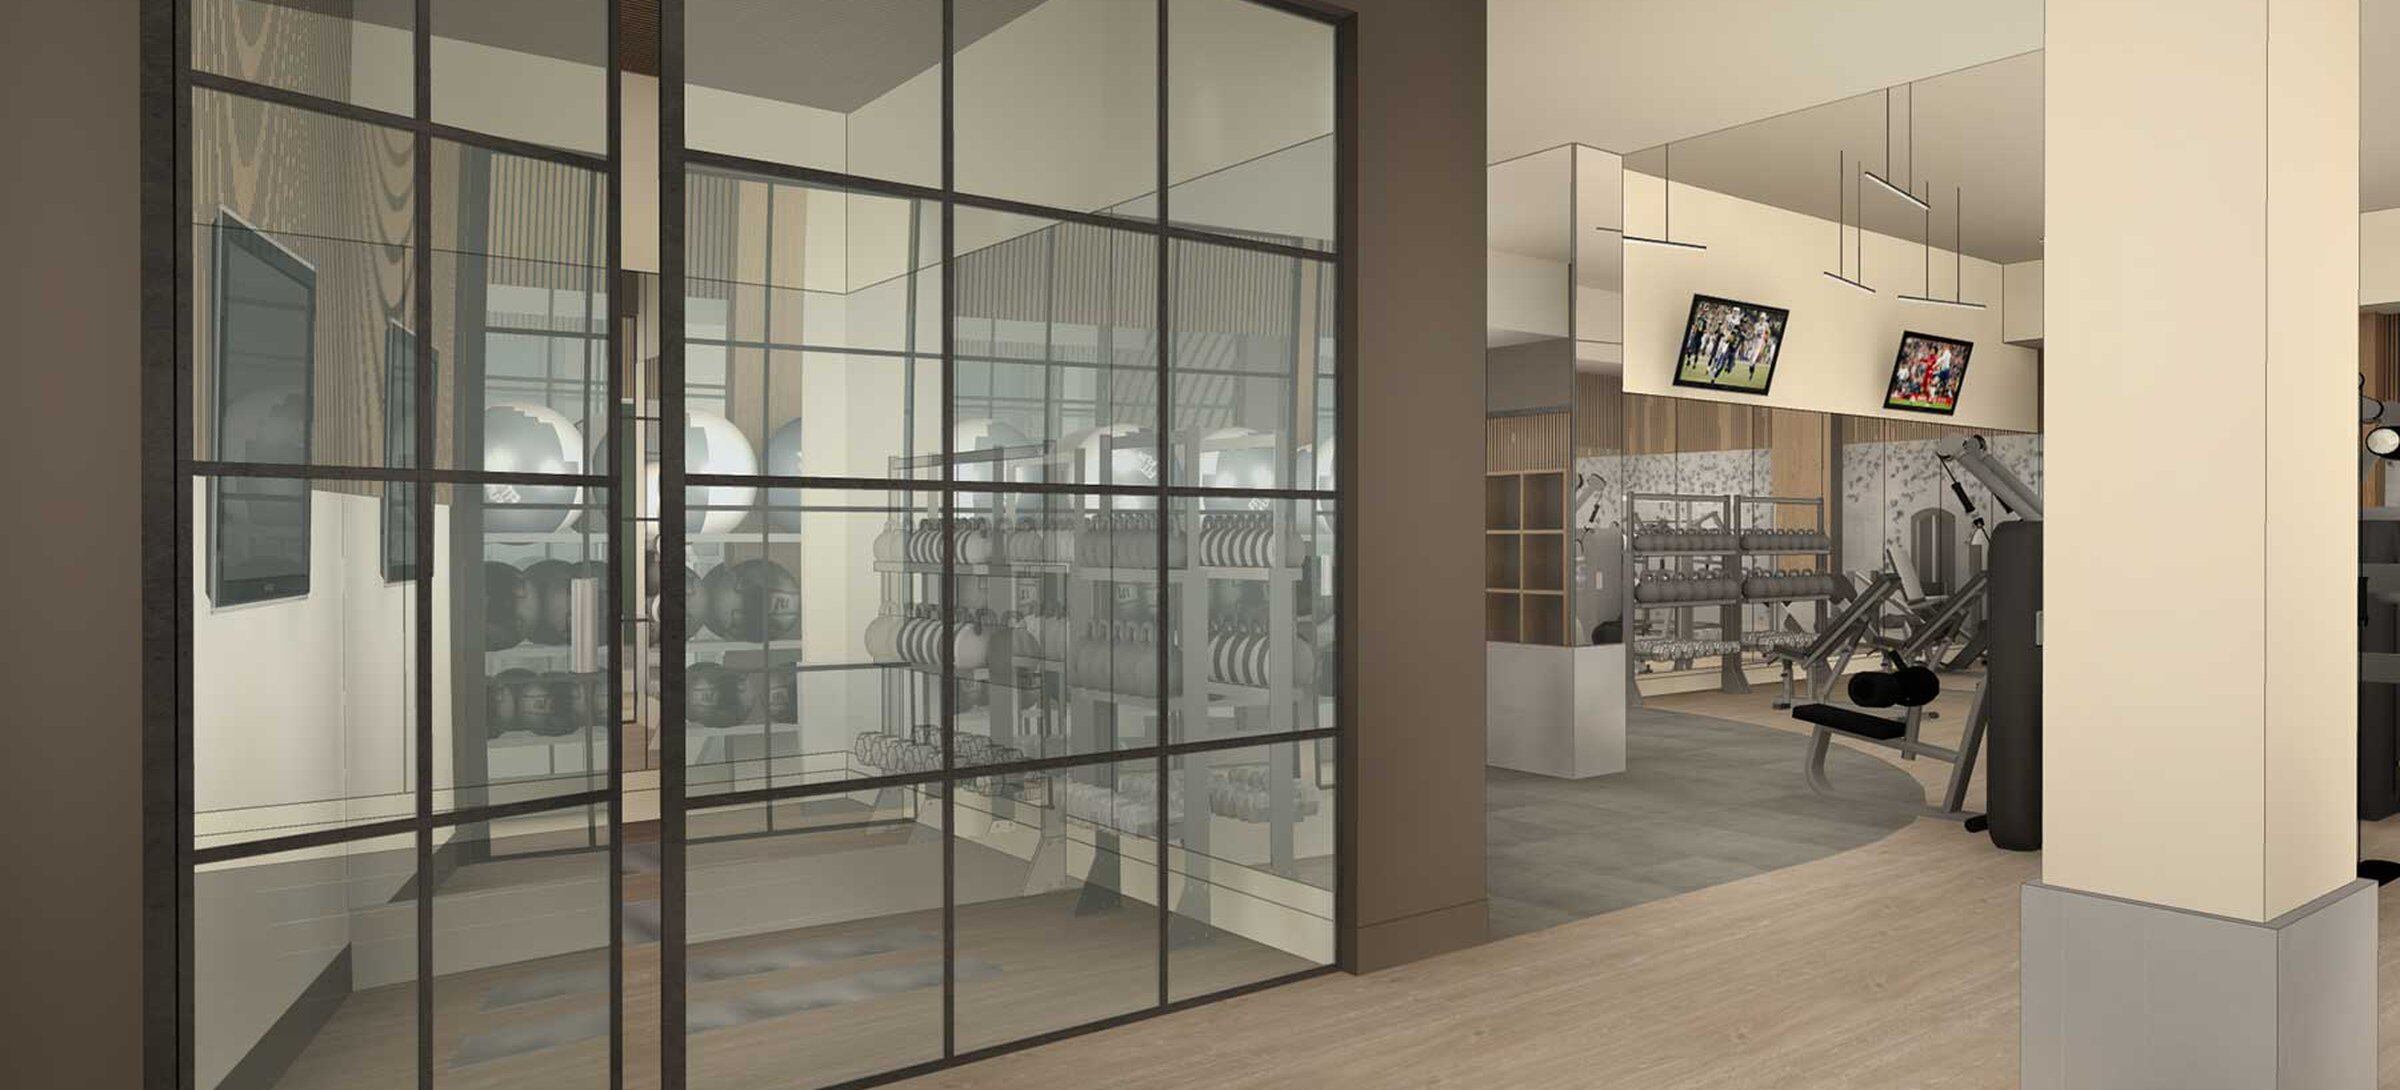 Coming Soon: Expanded fitness center and fitness studios with brand new equipment, including Echelon Mirror virtual fitness technology (Rendering)